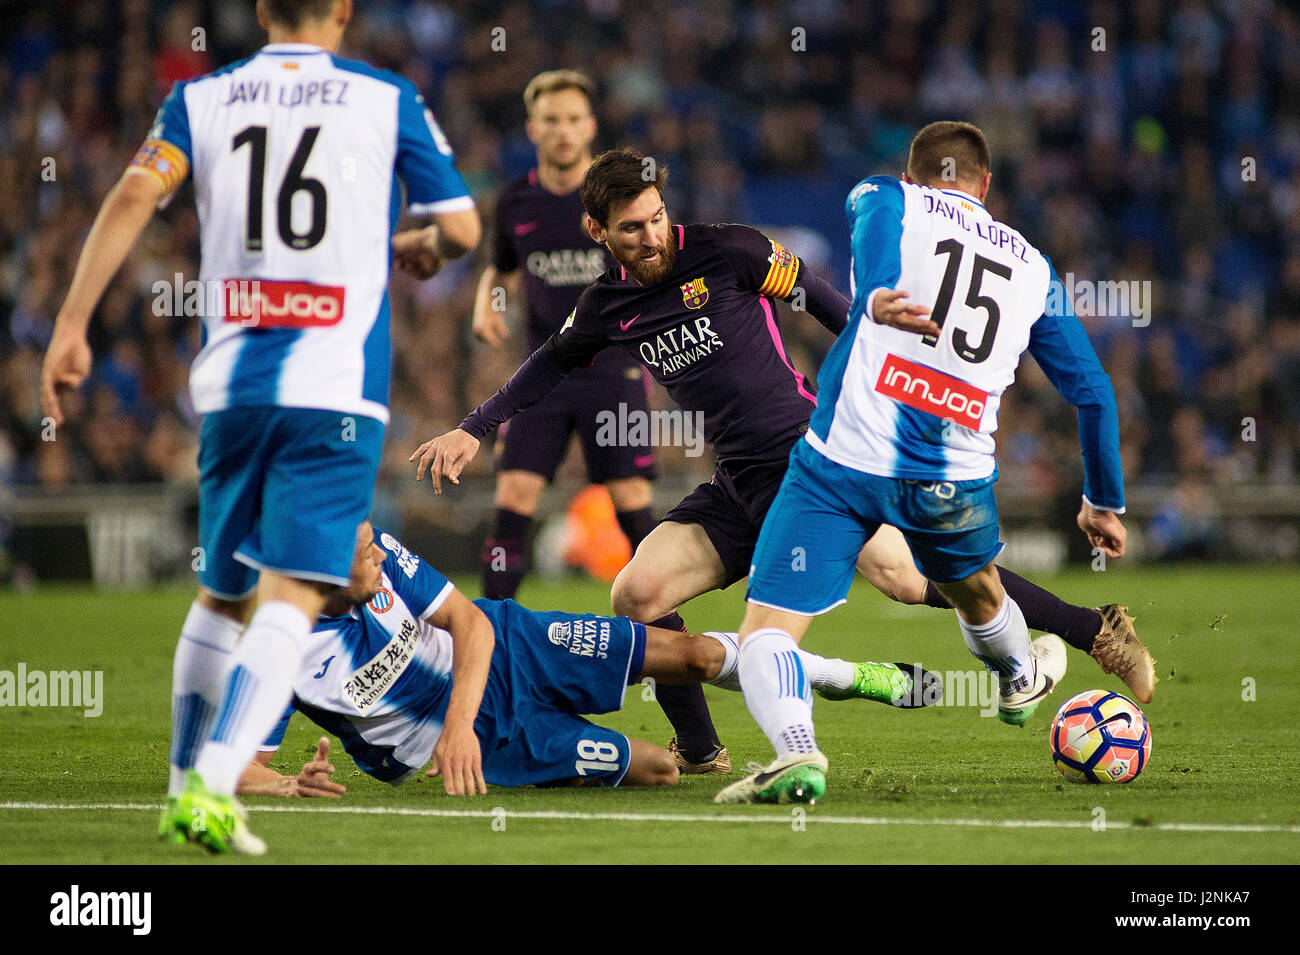 Barcelona, Spain. 29th Apr, 2017. Barcelona's Lionel Messi(2nd R) vies with Espanyol's David Lopez (1st R) and Javi Fuego (2nd L) during the Spanish first division (La Liga) soccer match between RCD Espanyol and FC Barcelona at RCDE Stadium in Barcelona, Spain, April 29, 2017. Barcelona won 3-0. Credit: Lino De Vallier/Xinhua/Alamy Live News Stock Photo